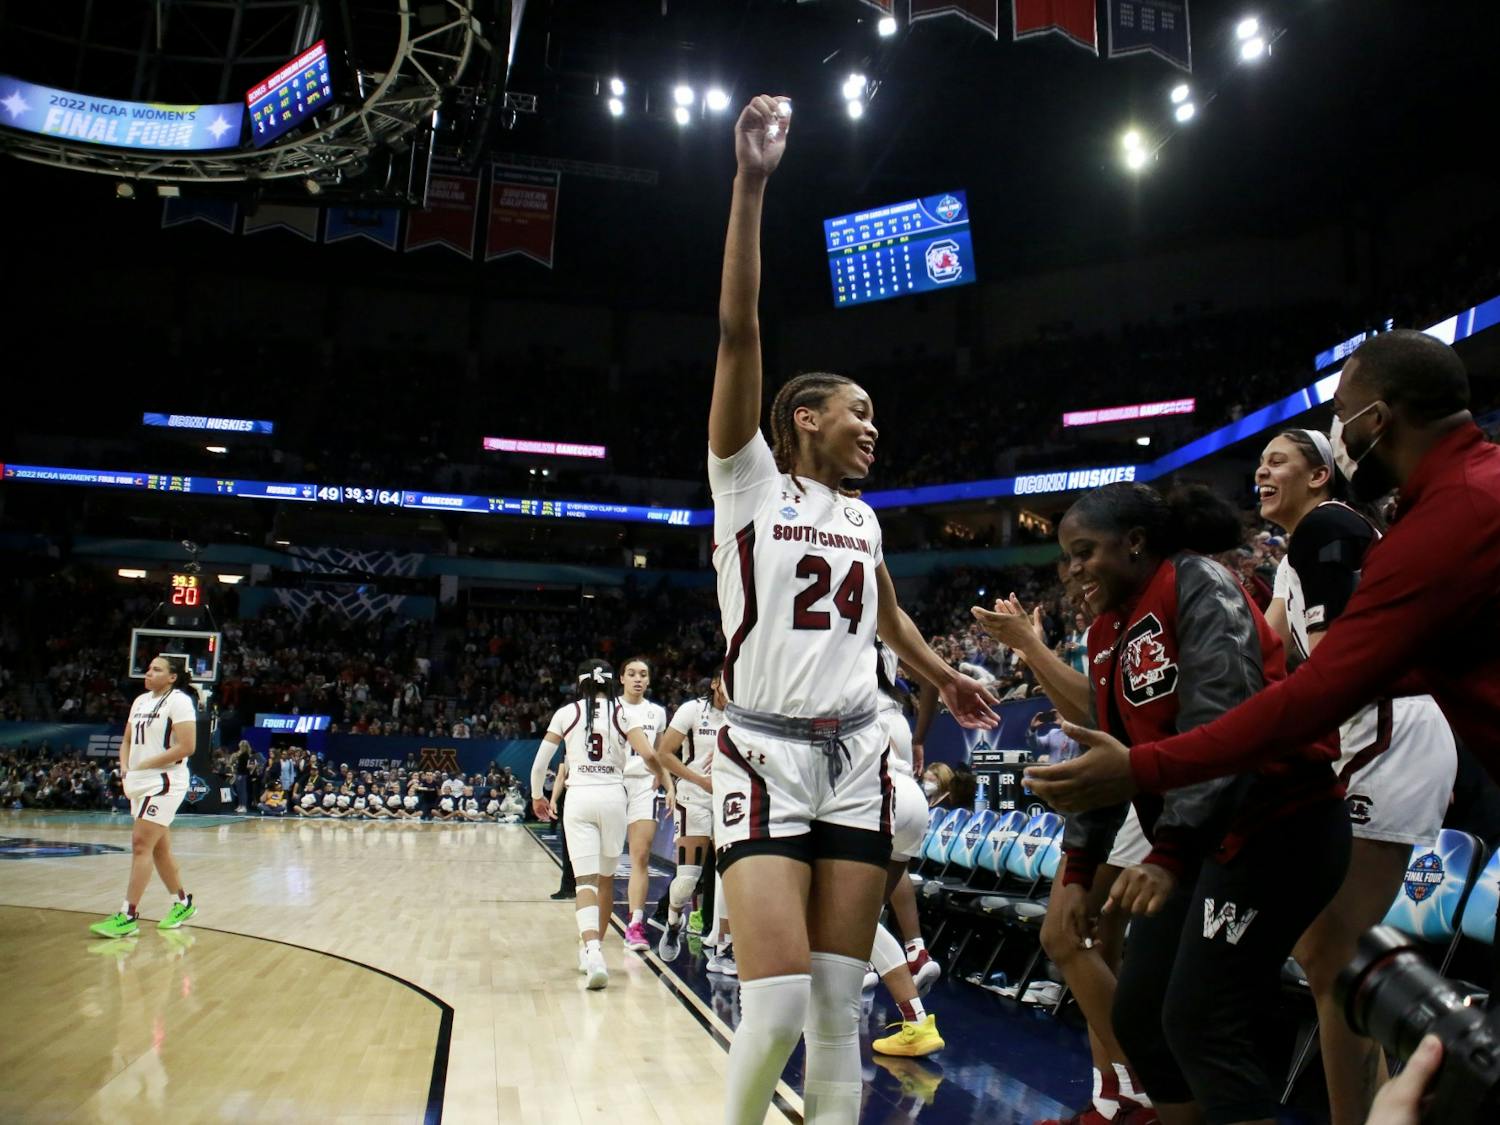 Senior guard LeLe Grissett celebrates final minute of South Carolina's 64-49 victory over University of Connecticut, winning the 2022 National Championship on April 3, 2022.